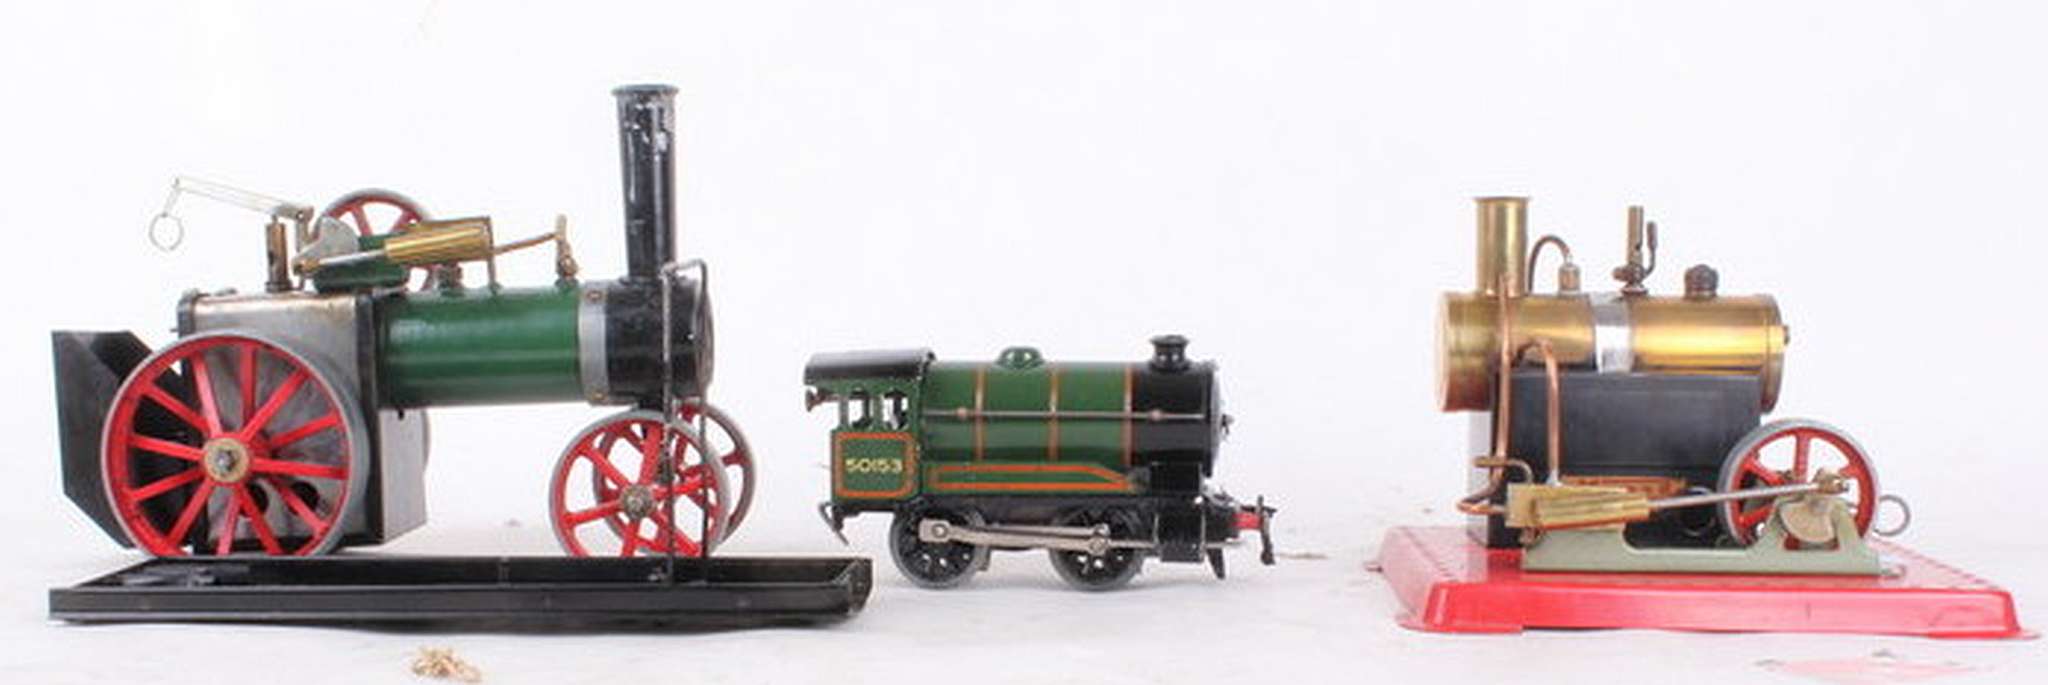 A Mamod Type TE1 Steam Tractor engine and a Mamod brass stationary engine, single cylinder, with